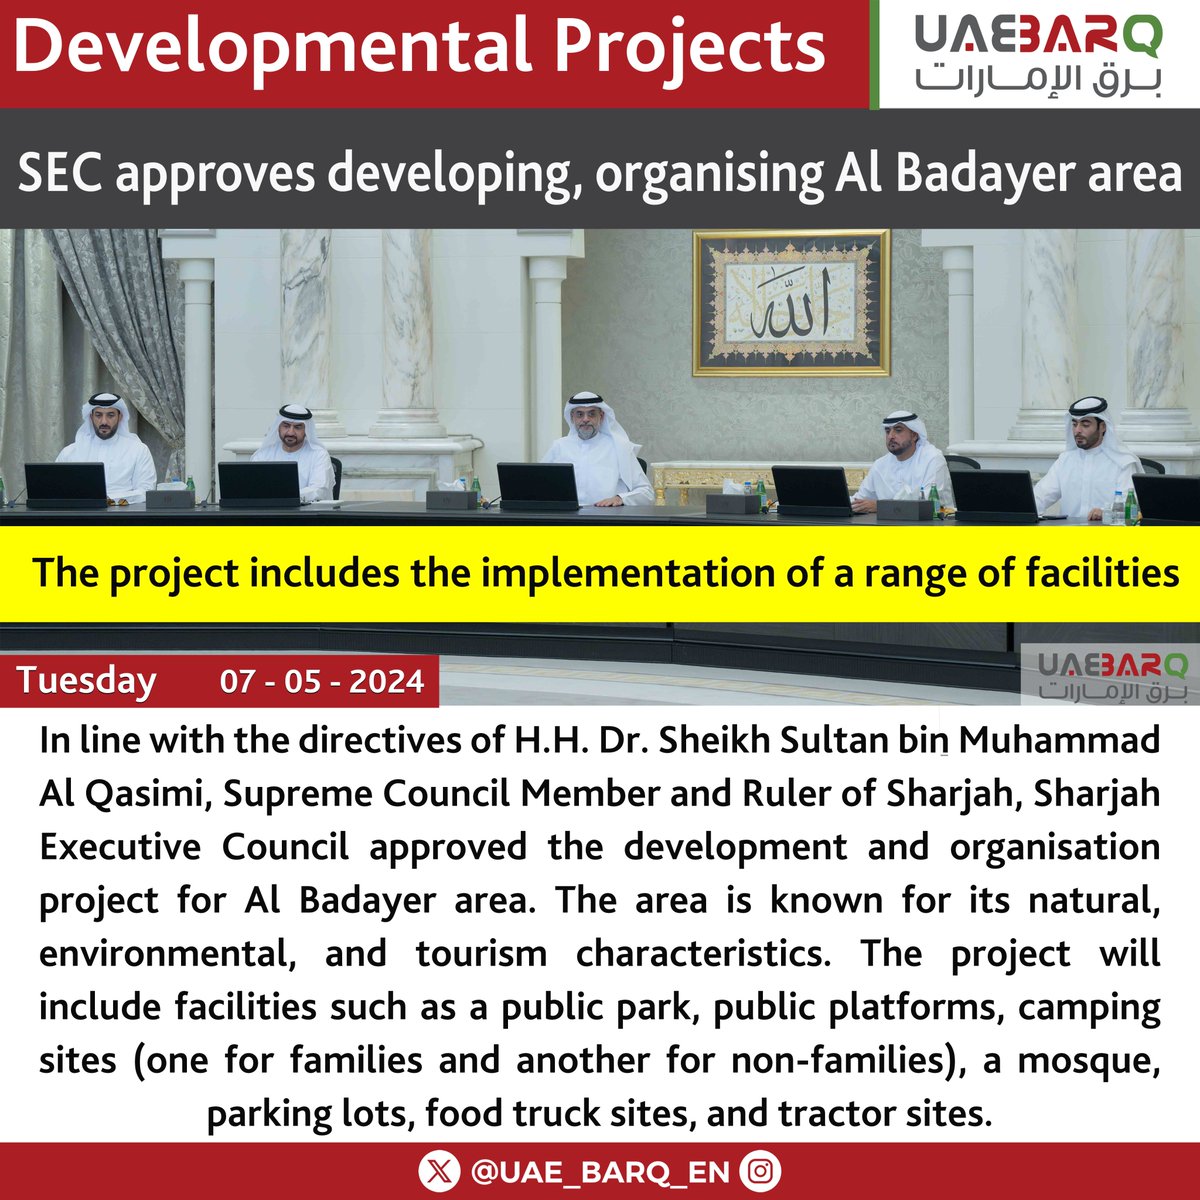 #SEC approves developing, and organising Al Badayer area. #UAE_BARQ_EN